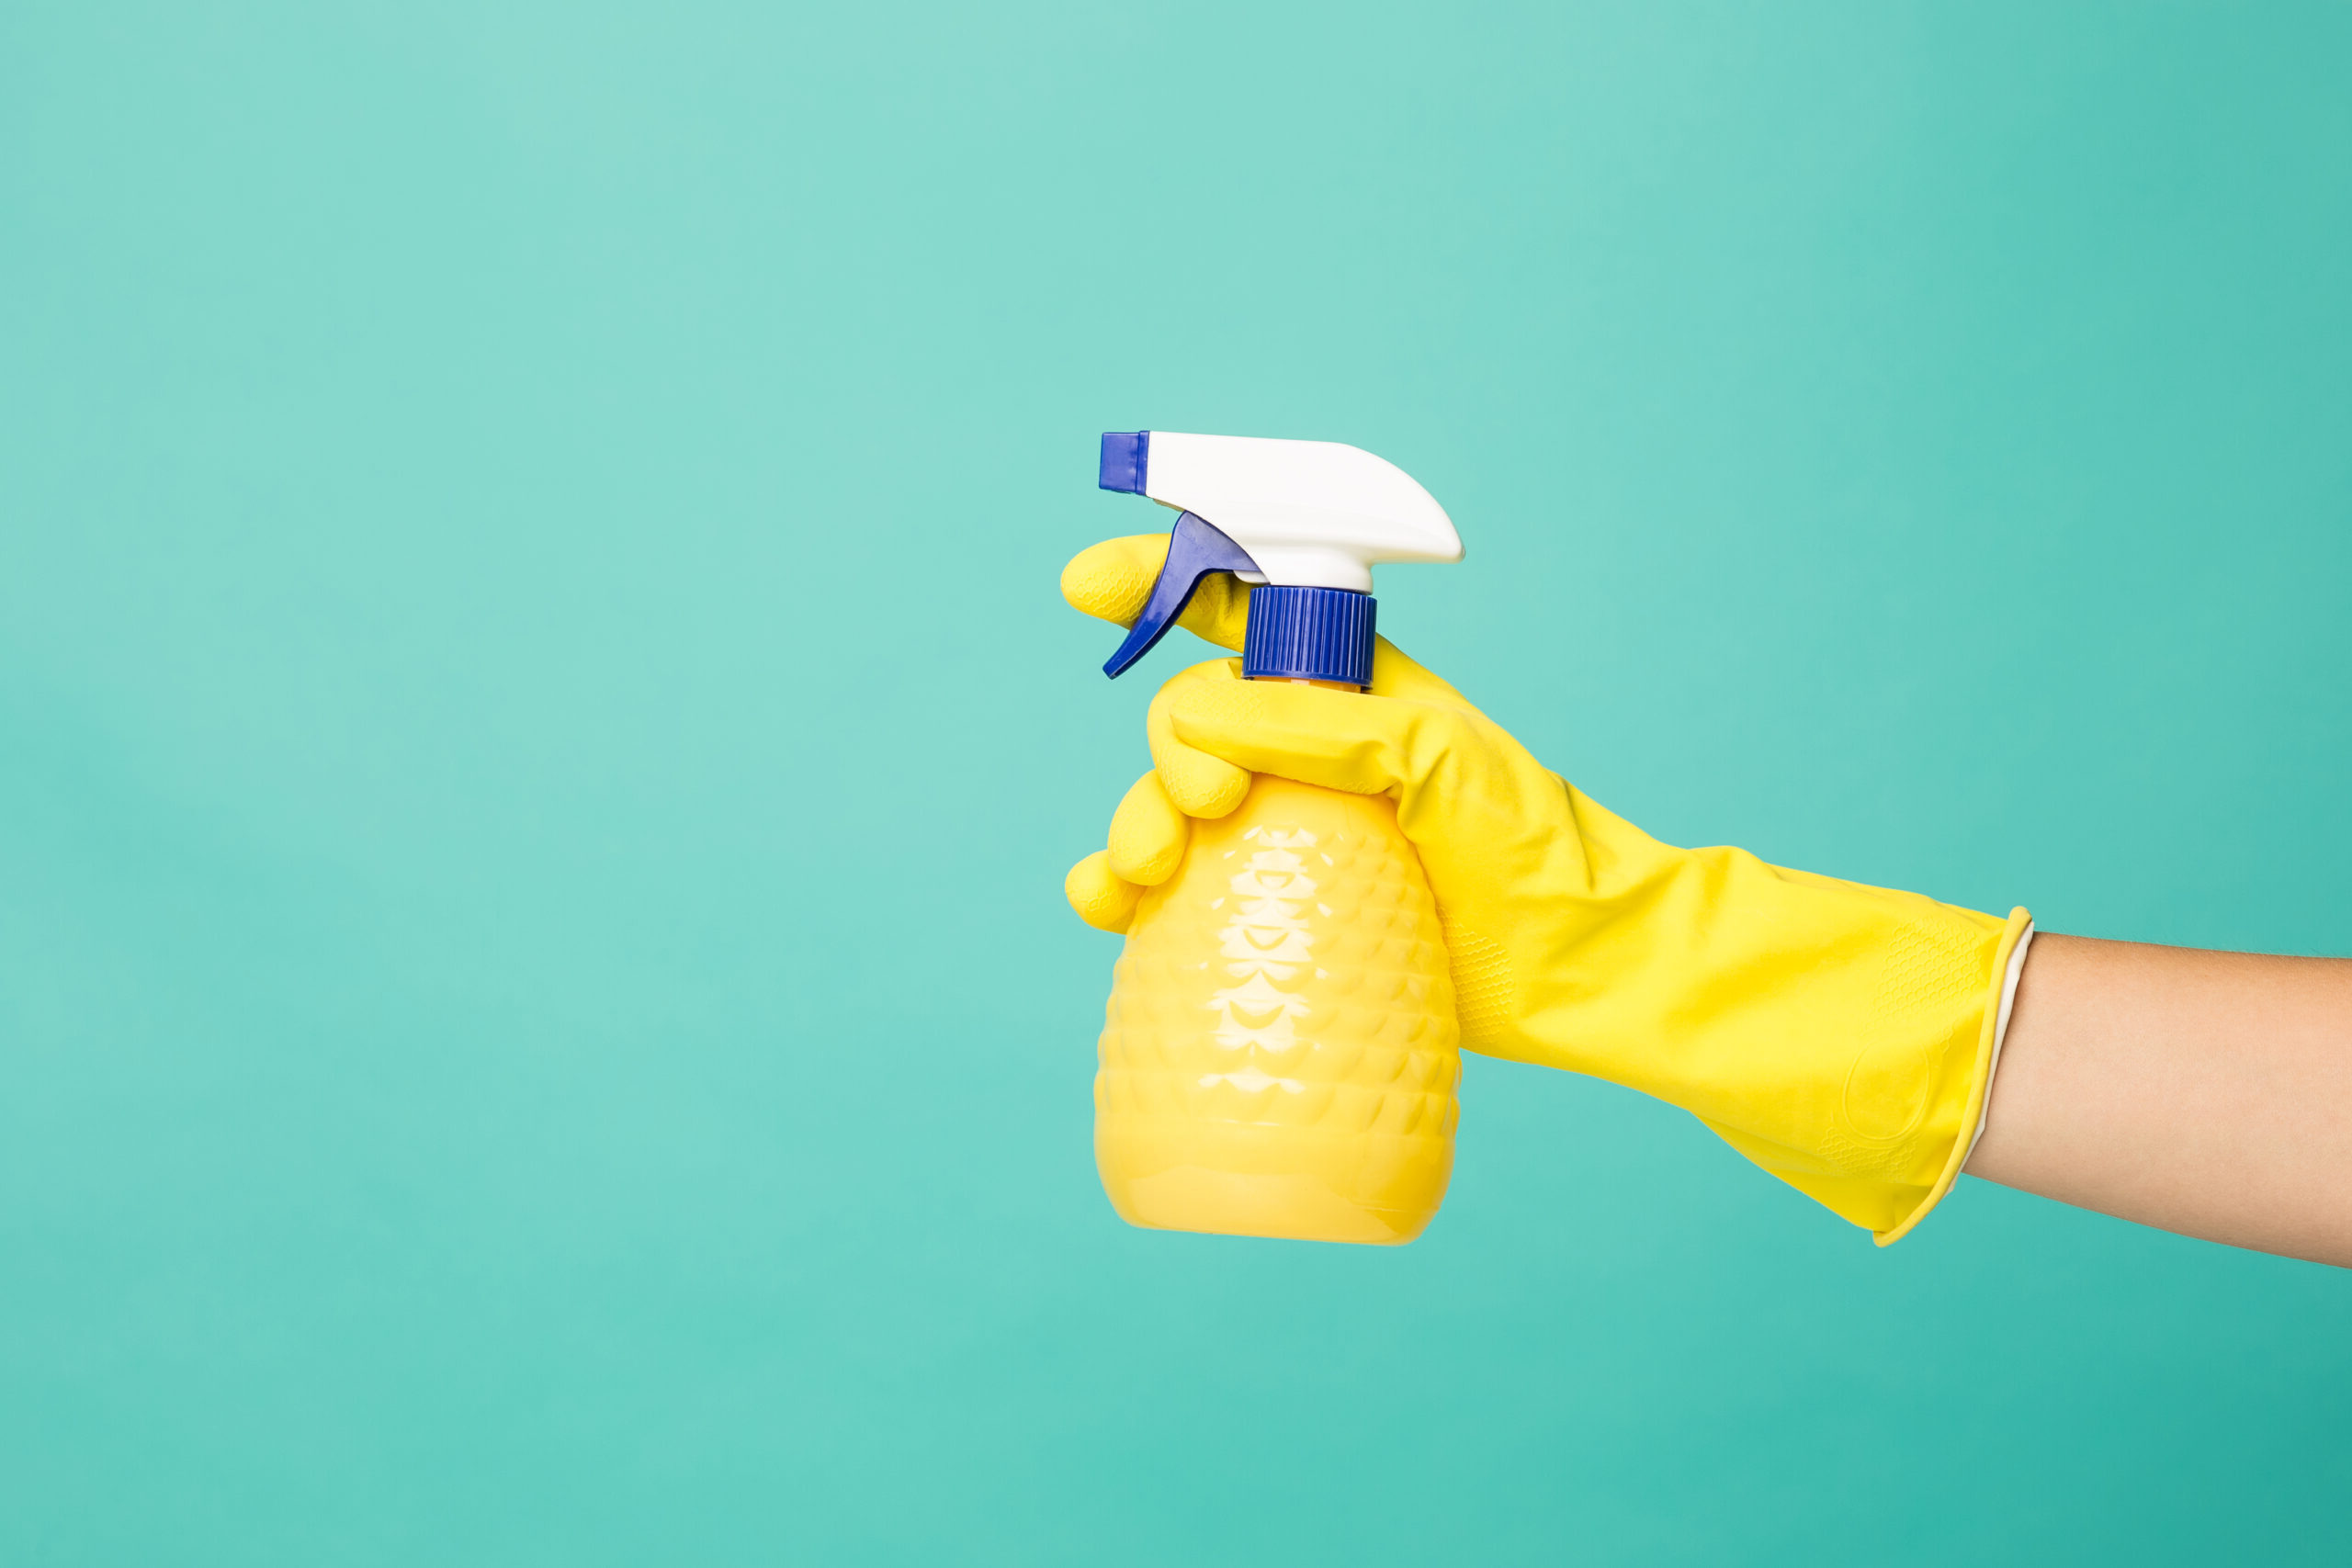 Close up picture of afemale hand and house-cleaning spray on a blue abstract background